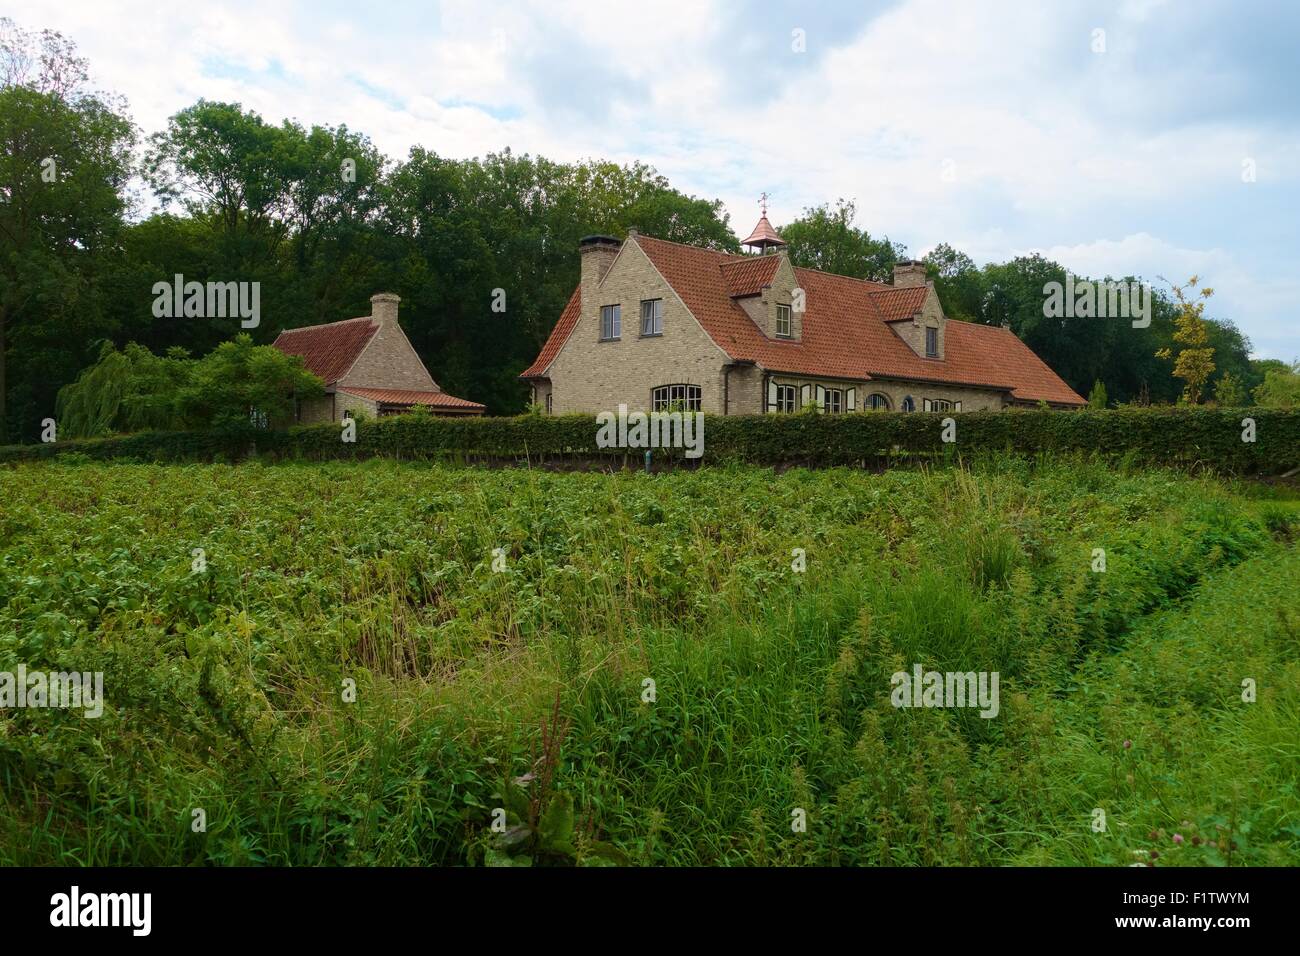 Field with large house Stock Photo